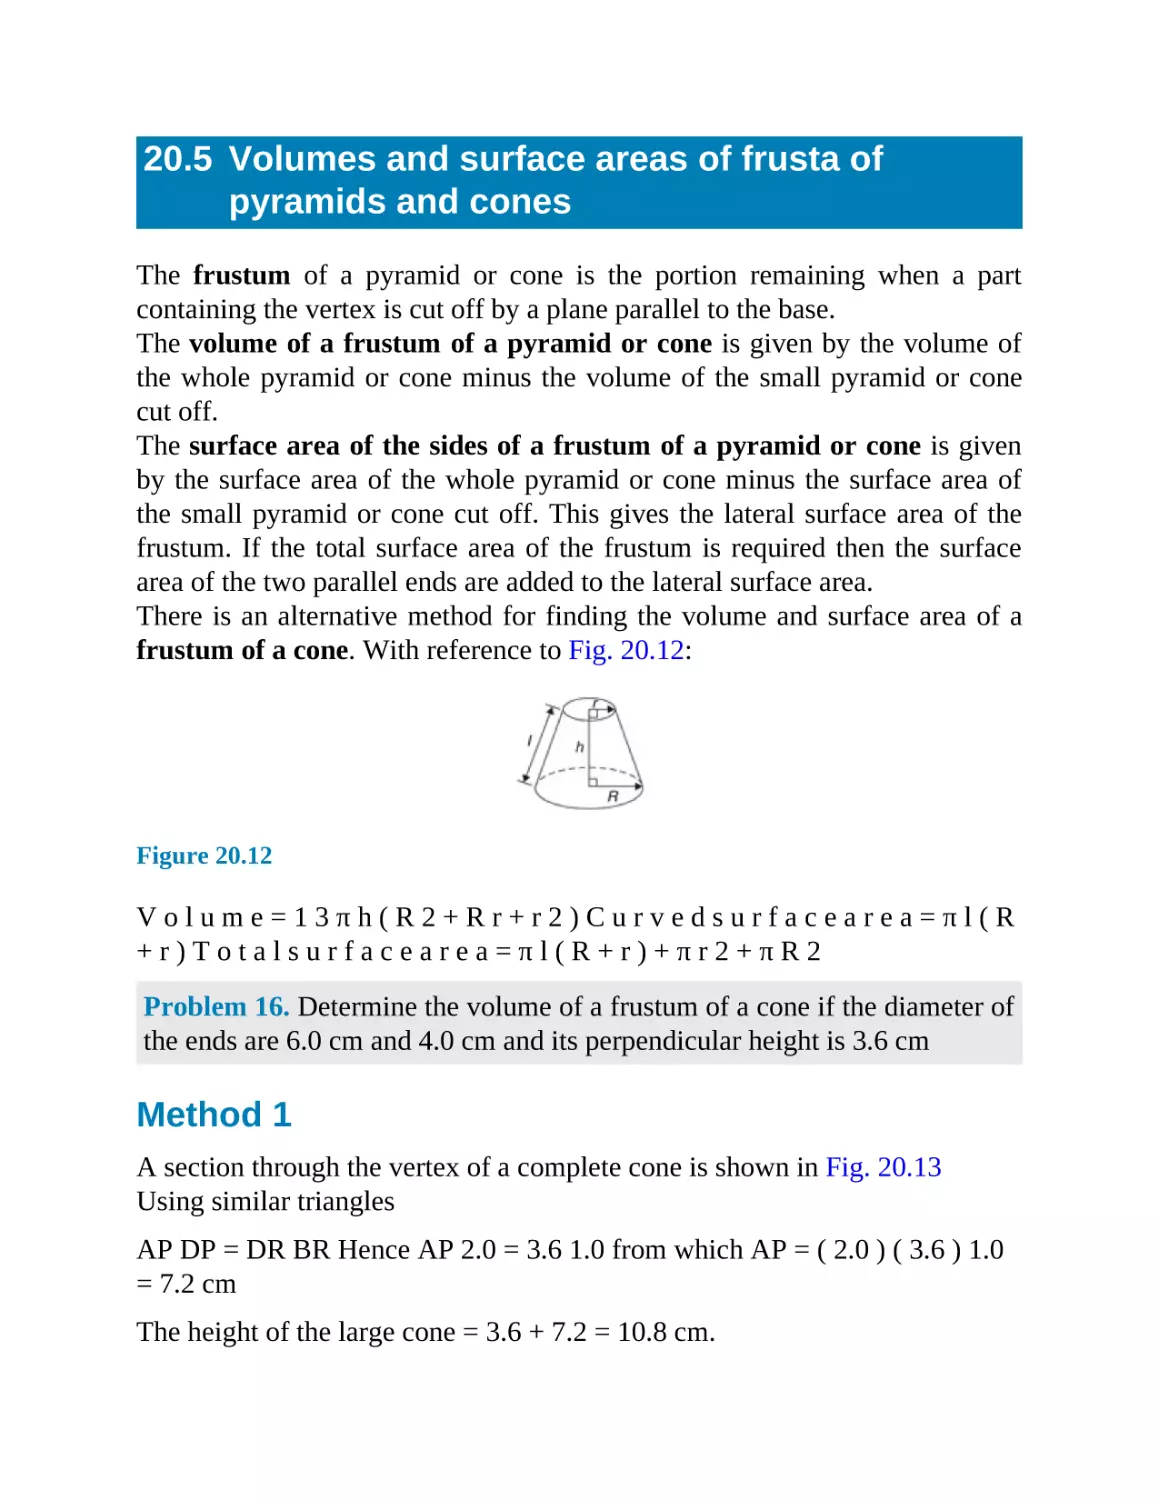 20.5 Volumes and surface areas of frusta of pyramids and cones